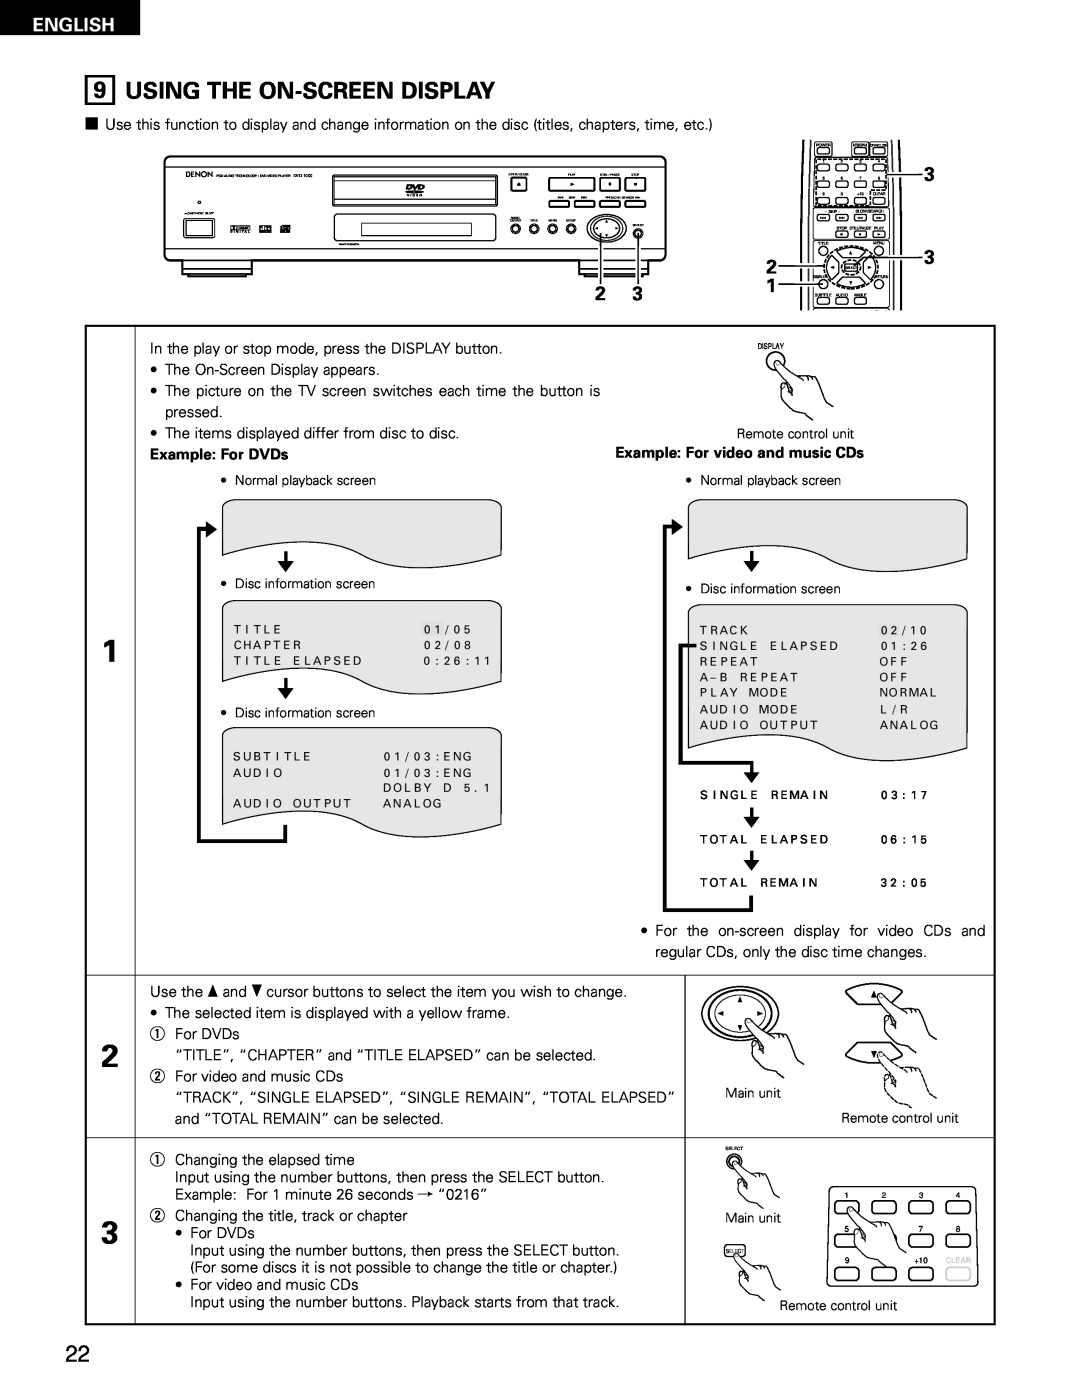 Denon DVD-1000 manual Using The On-Screen Display, English, Example For DVDs, Example For video and music CDs 